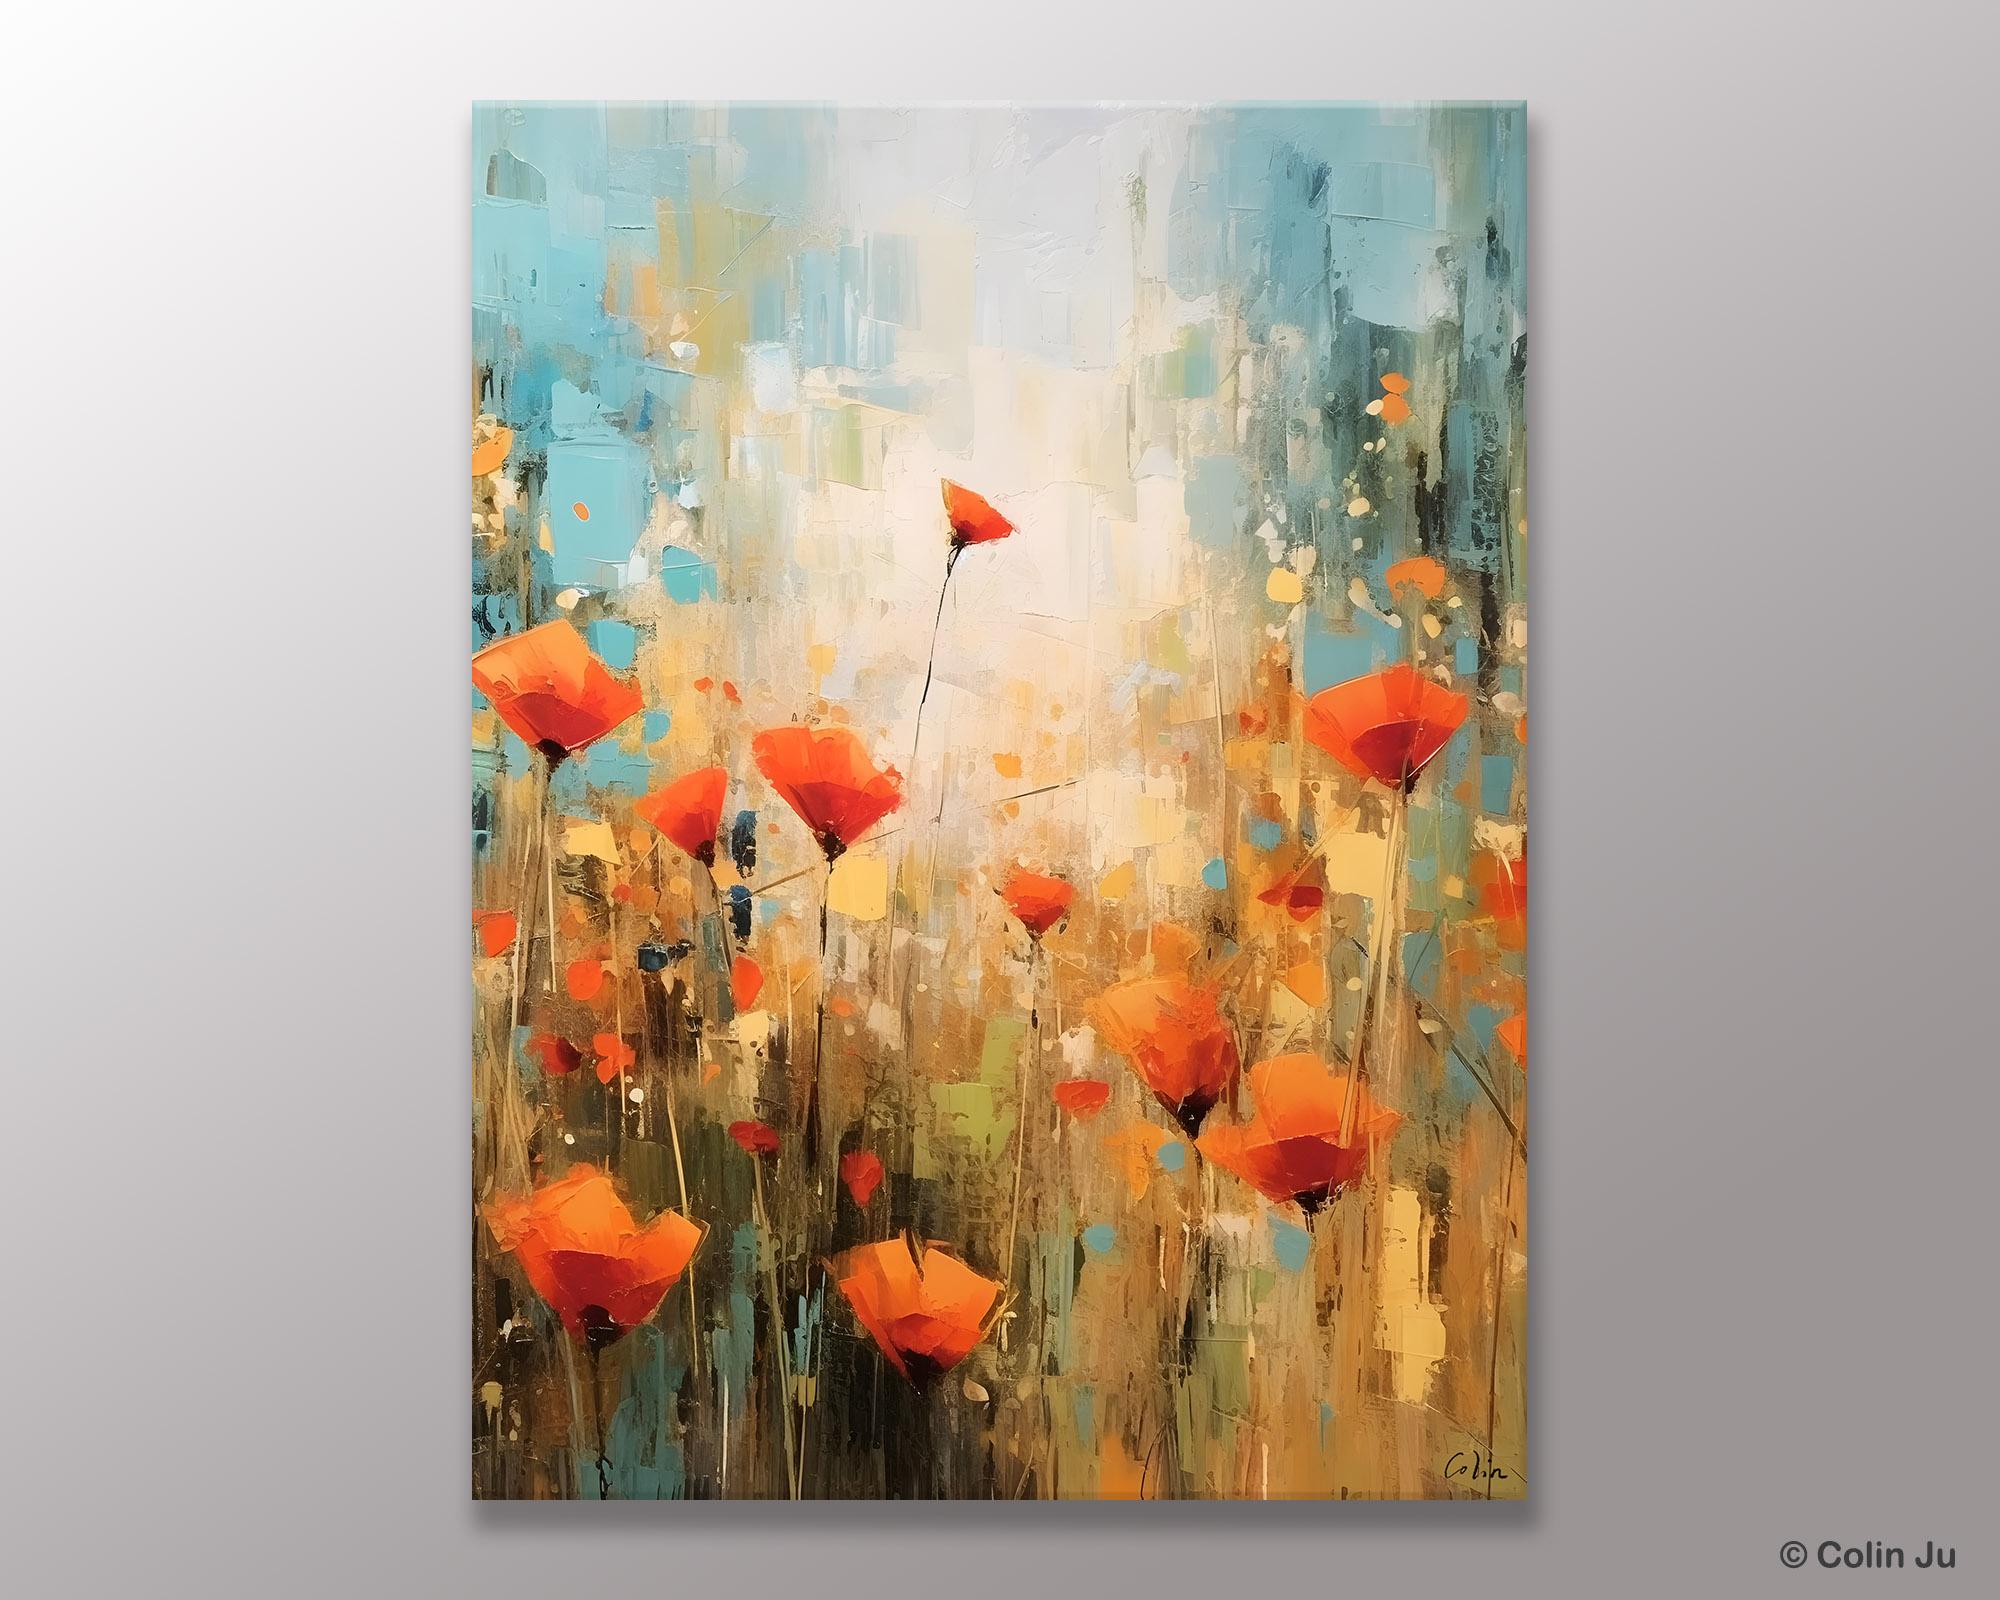 Abstract Flower Painting, Flower Acrylic Painting, Canvas Painting Flower, Original Paintings on Canvas, Modern Acrylic Paintings for Bedroom-Paintingforhome